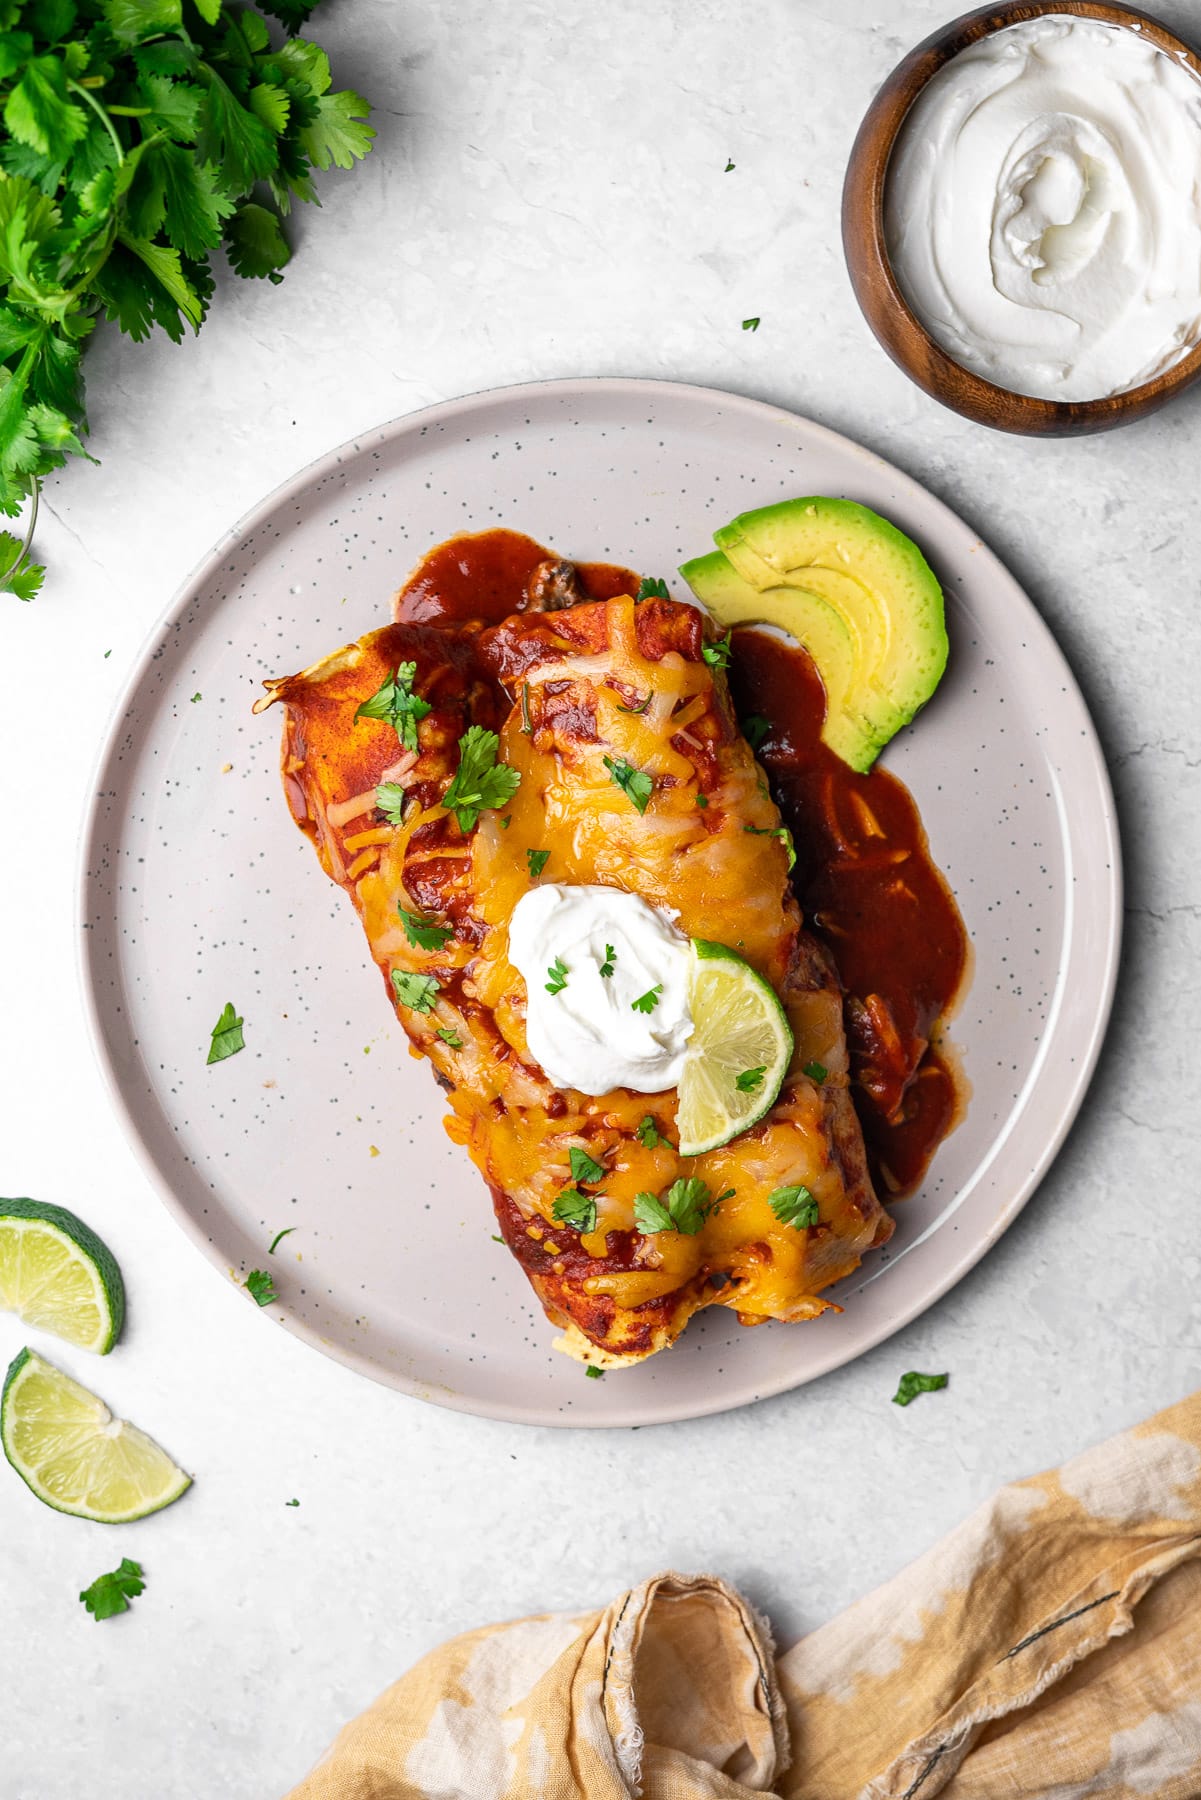 two enchiladas in a plate with sour cream, limes, cilantro, and avocado